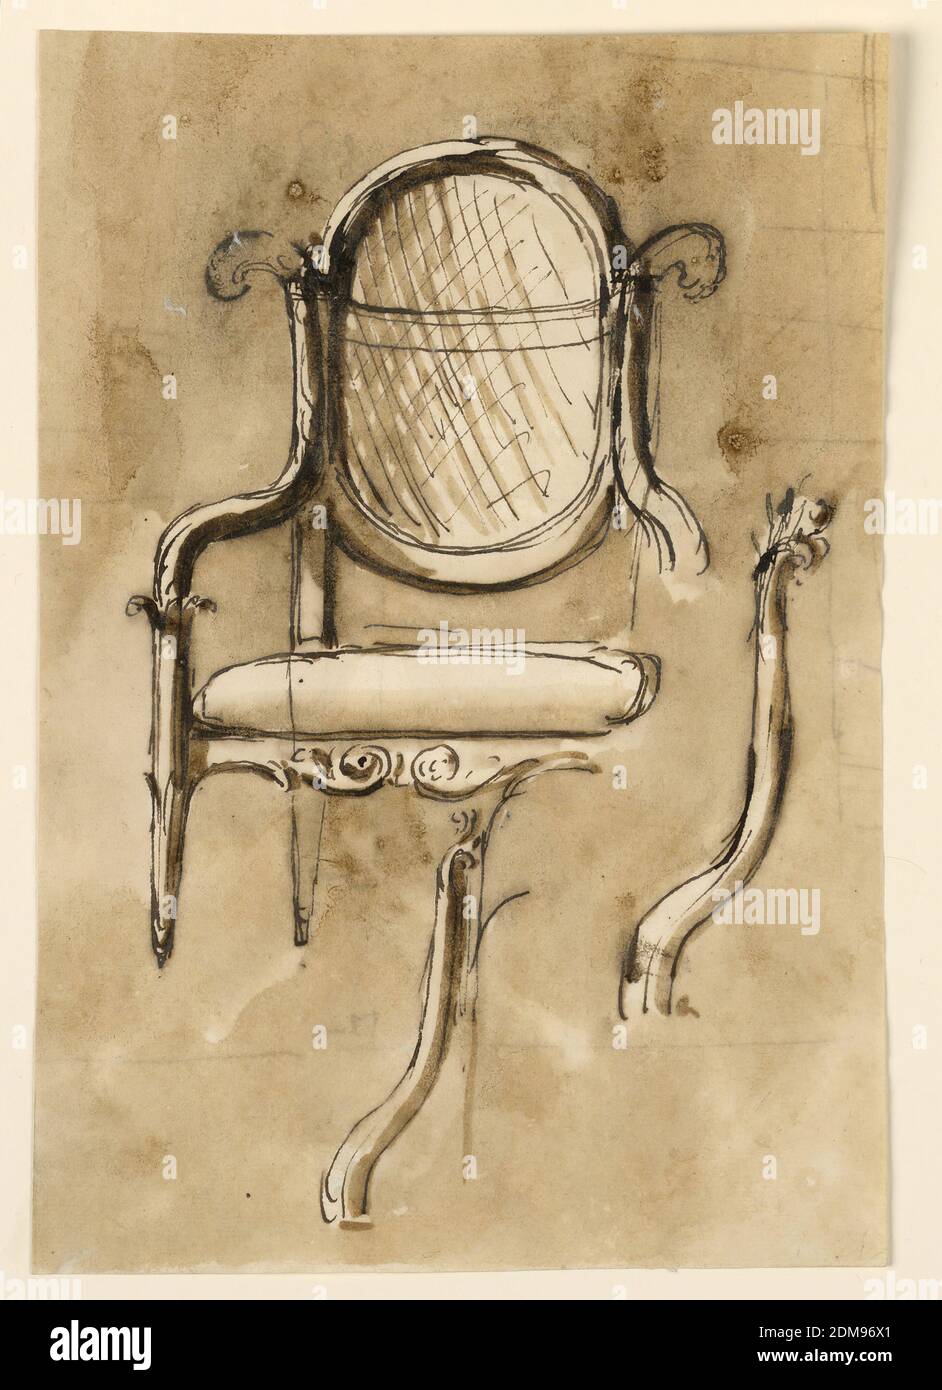 Chair, Giuseppe Barberi, Italian, 1746–1809, Pen and brown ink, brush and brown wash on off-white laid paper, Above is the chair, seen from the front, the legs and the fore part of the arm being omitted, at right. The seat is upholstered. The back is high oval with straw plaiting supported by the upper part of the back legs. The arms begin above, at the back, and end in the upper part of the front legs which have the shape of two calices, one in the other. Below and at right are two sketches for the curved arms. On the reverse is part of the architectural plan with the letters 'C', 'f Stock Photo